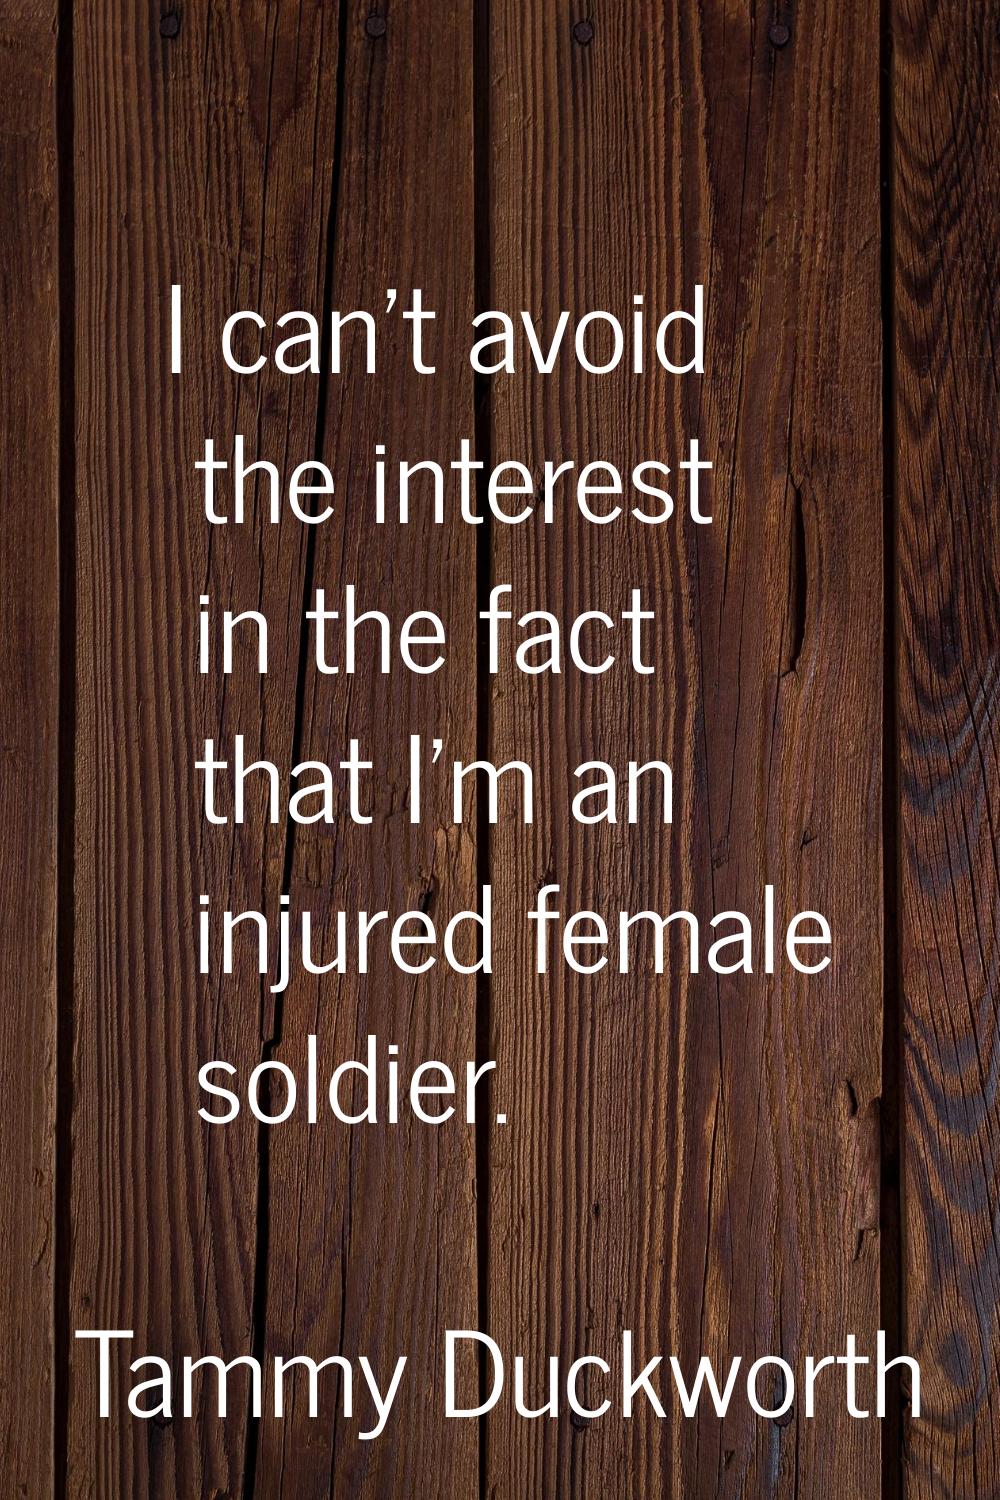 I can't avoid the interest in the fact that I'm an injured female soldier.